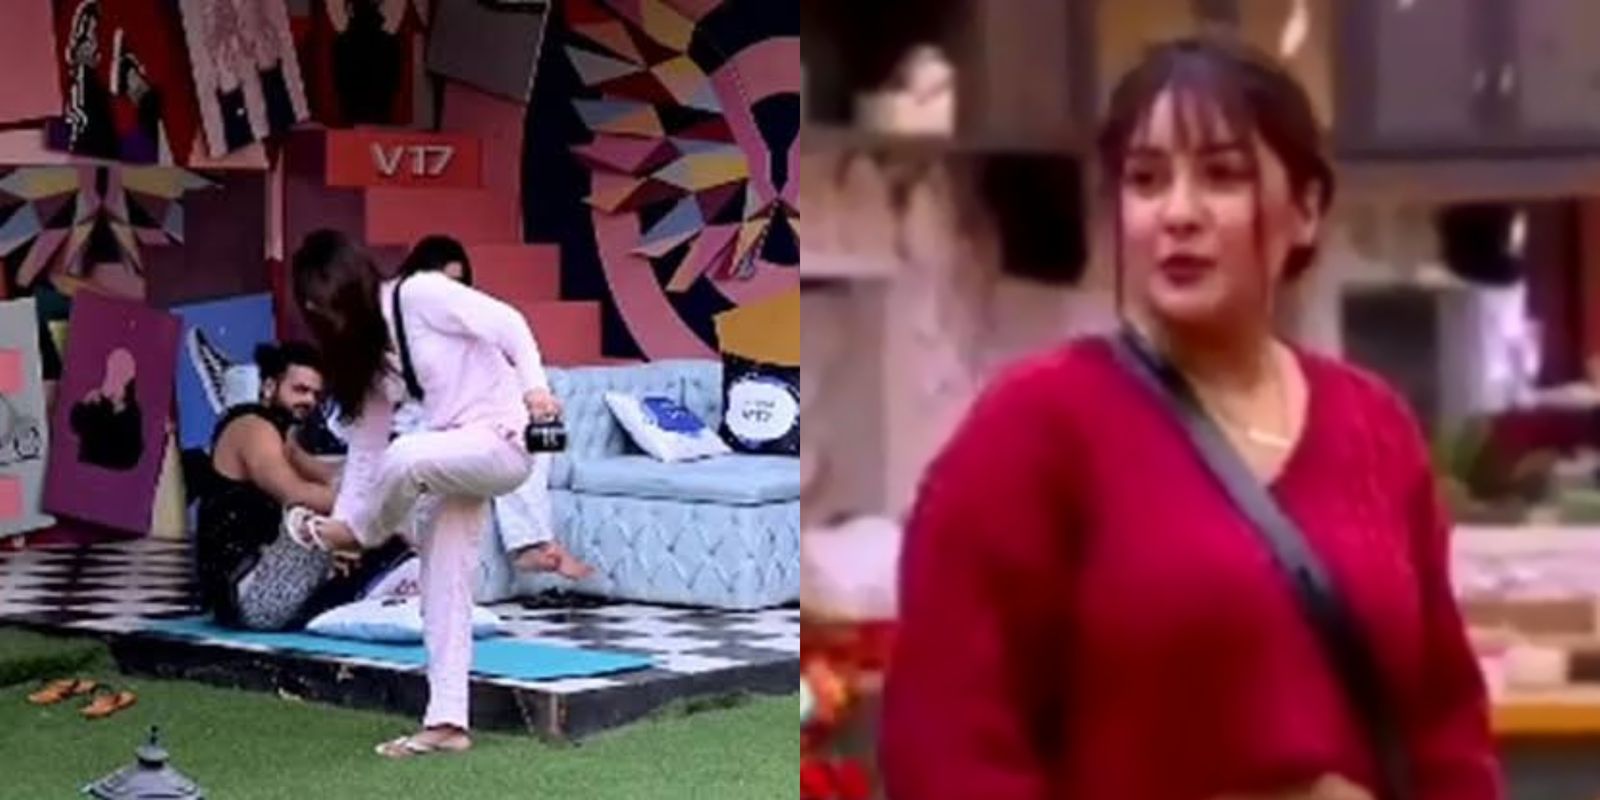 Bigg Boss 13 Preview: Vishal, Madhurima Decide Who Will Walk Out; Shehnaaz Gill Adds A Twist To Nominations